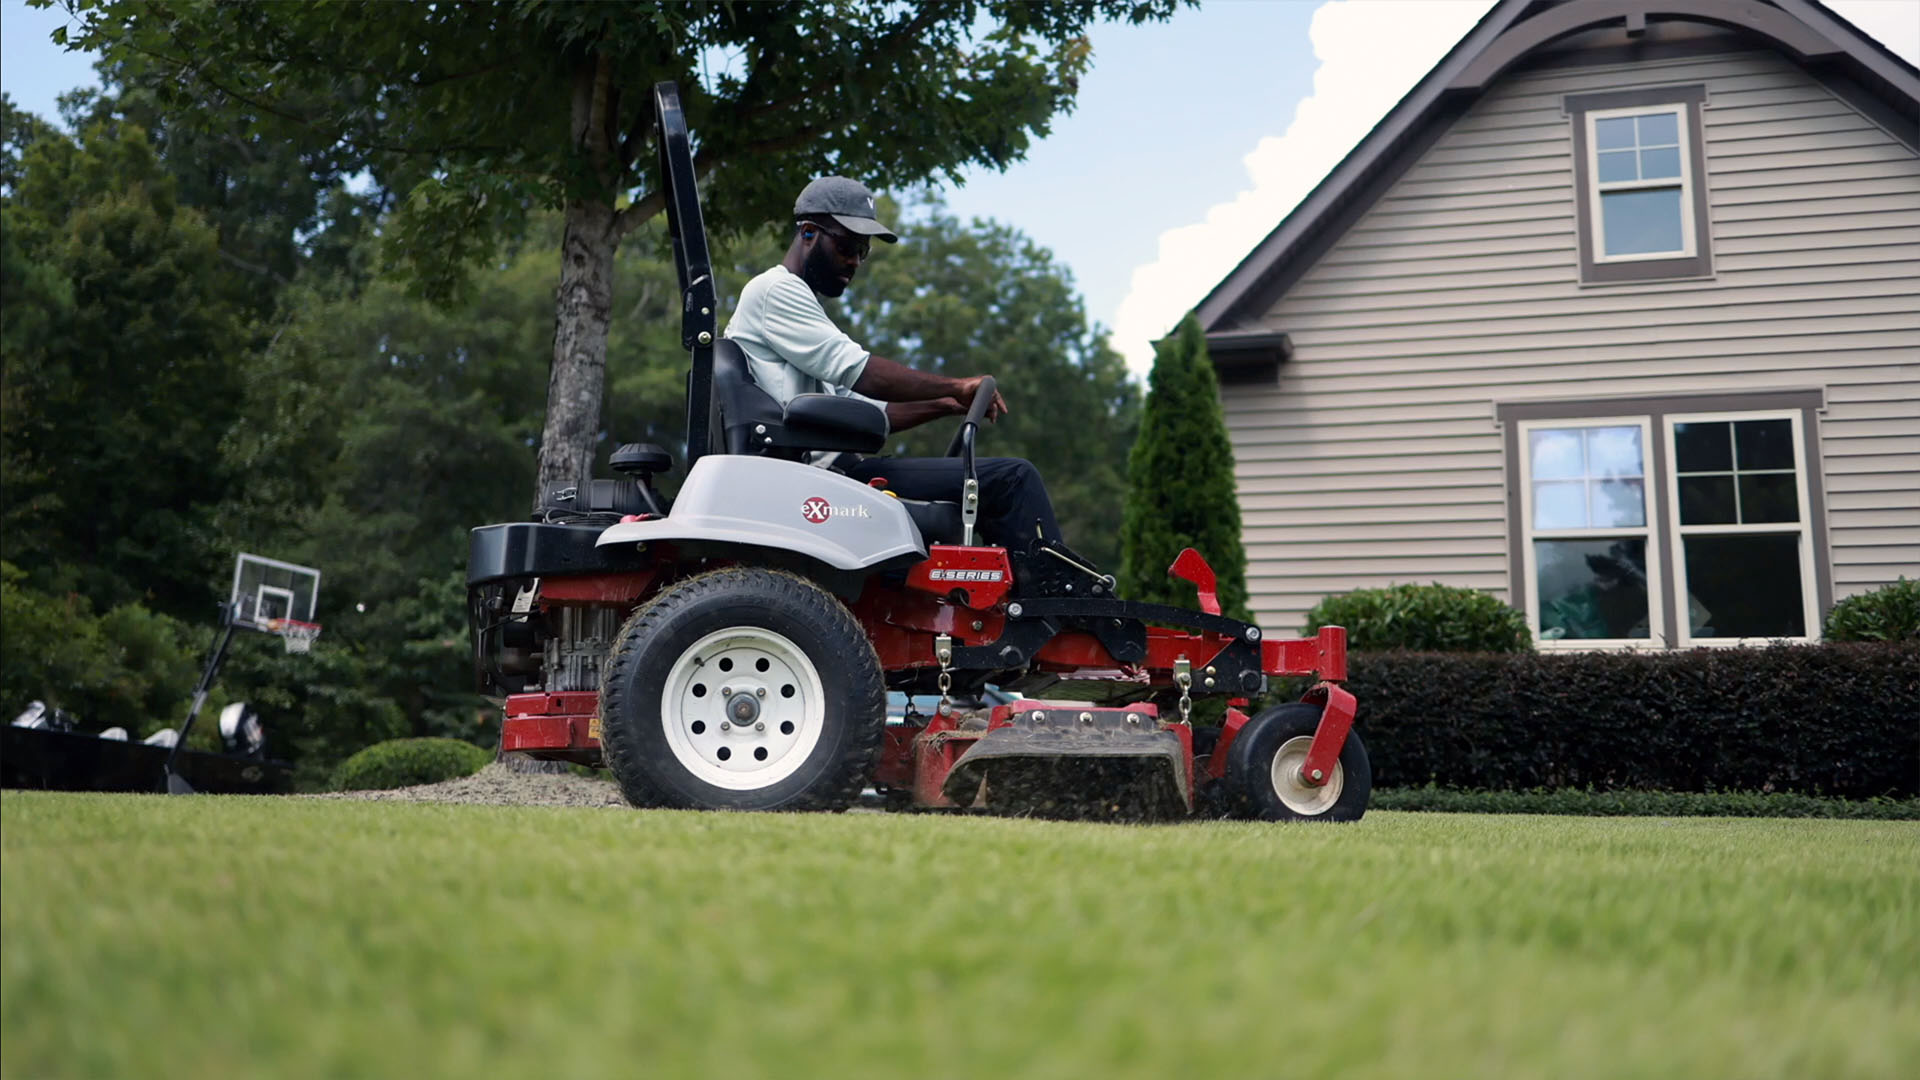 Brian Latimer riding lawn mower to prep lawn for spring